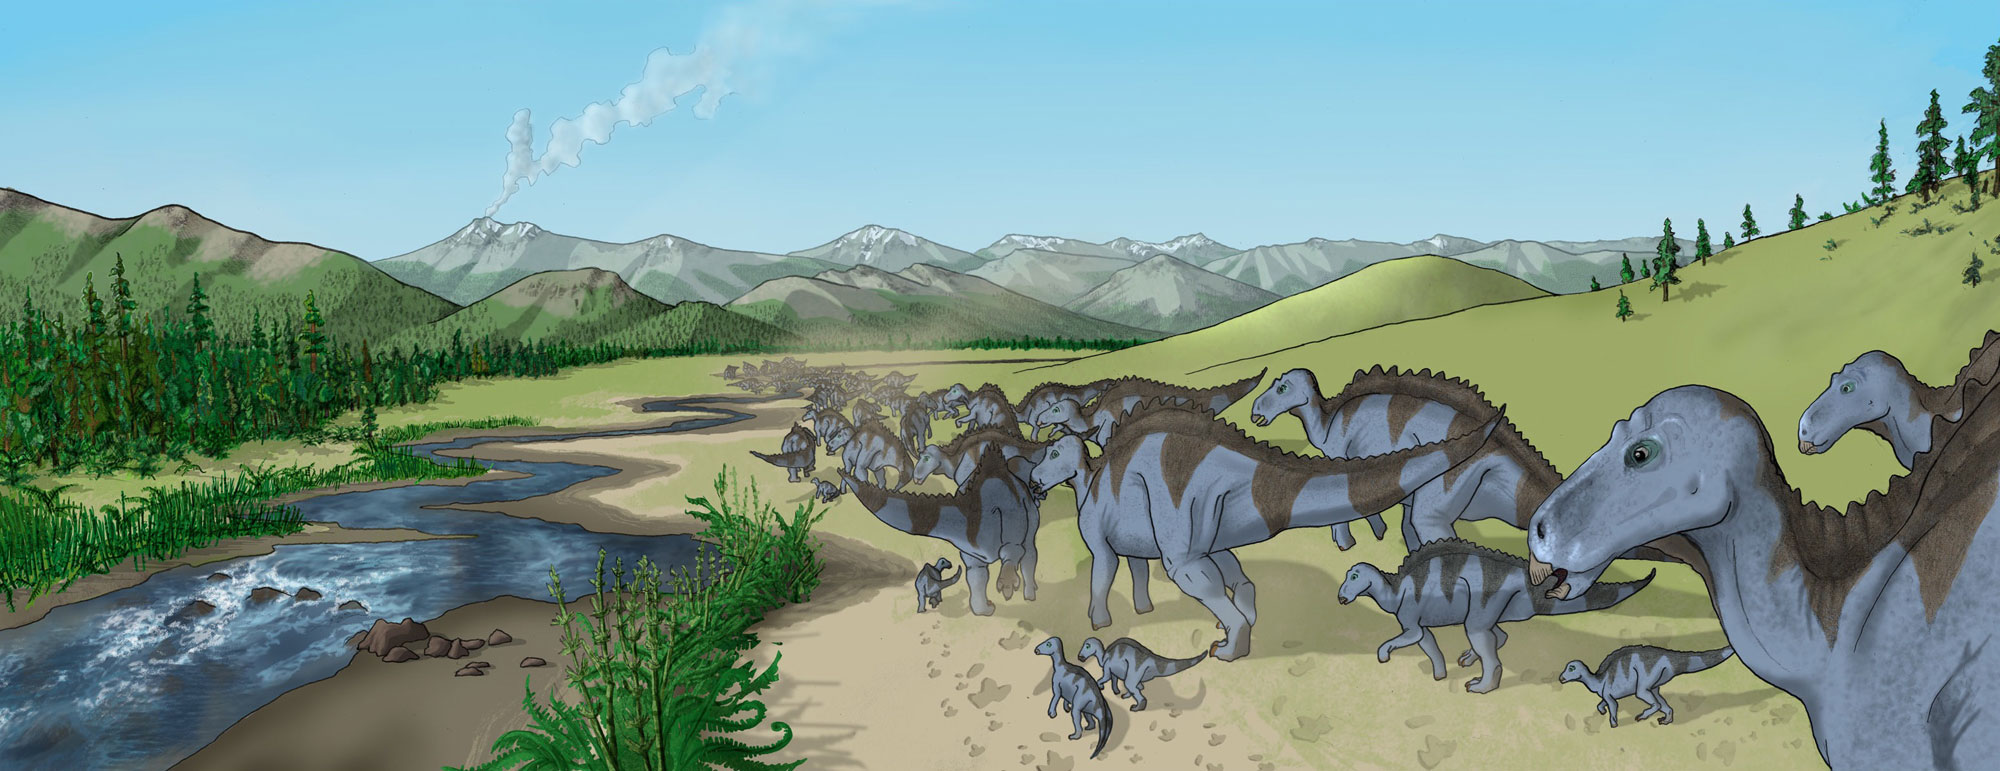 Color illustration of a herd of Maiasaura near a river with mountains in the distance. The herd includes adults and juveniles of various sizes. The animals have larger rear legs and shorter forelimbs. They walk on two or four legs. They are blue-gray in color with thick brown stripes and a brown stripe down their back.